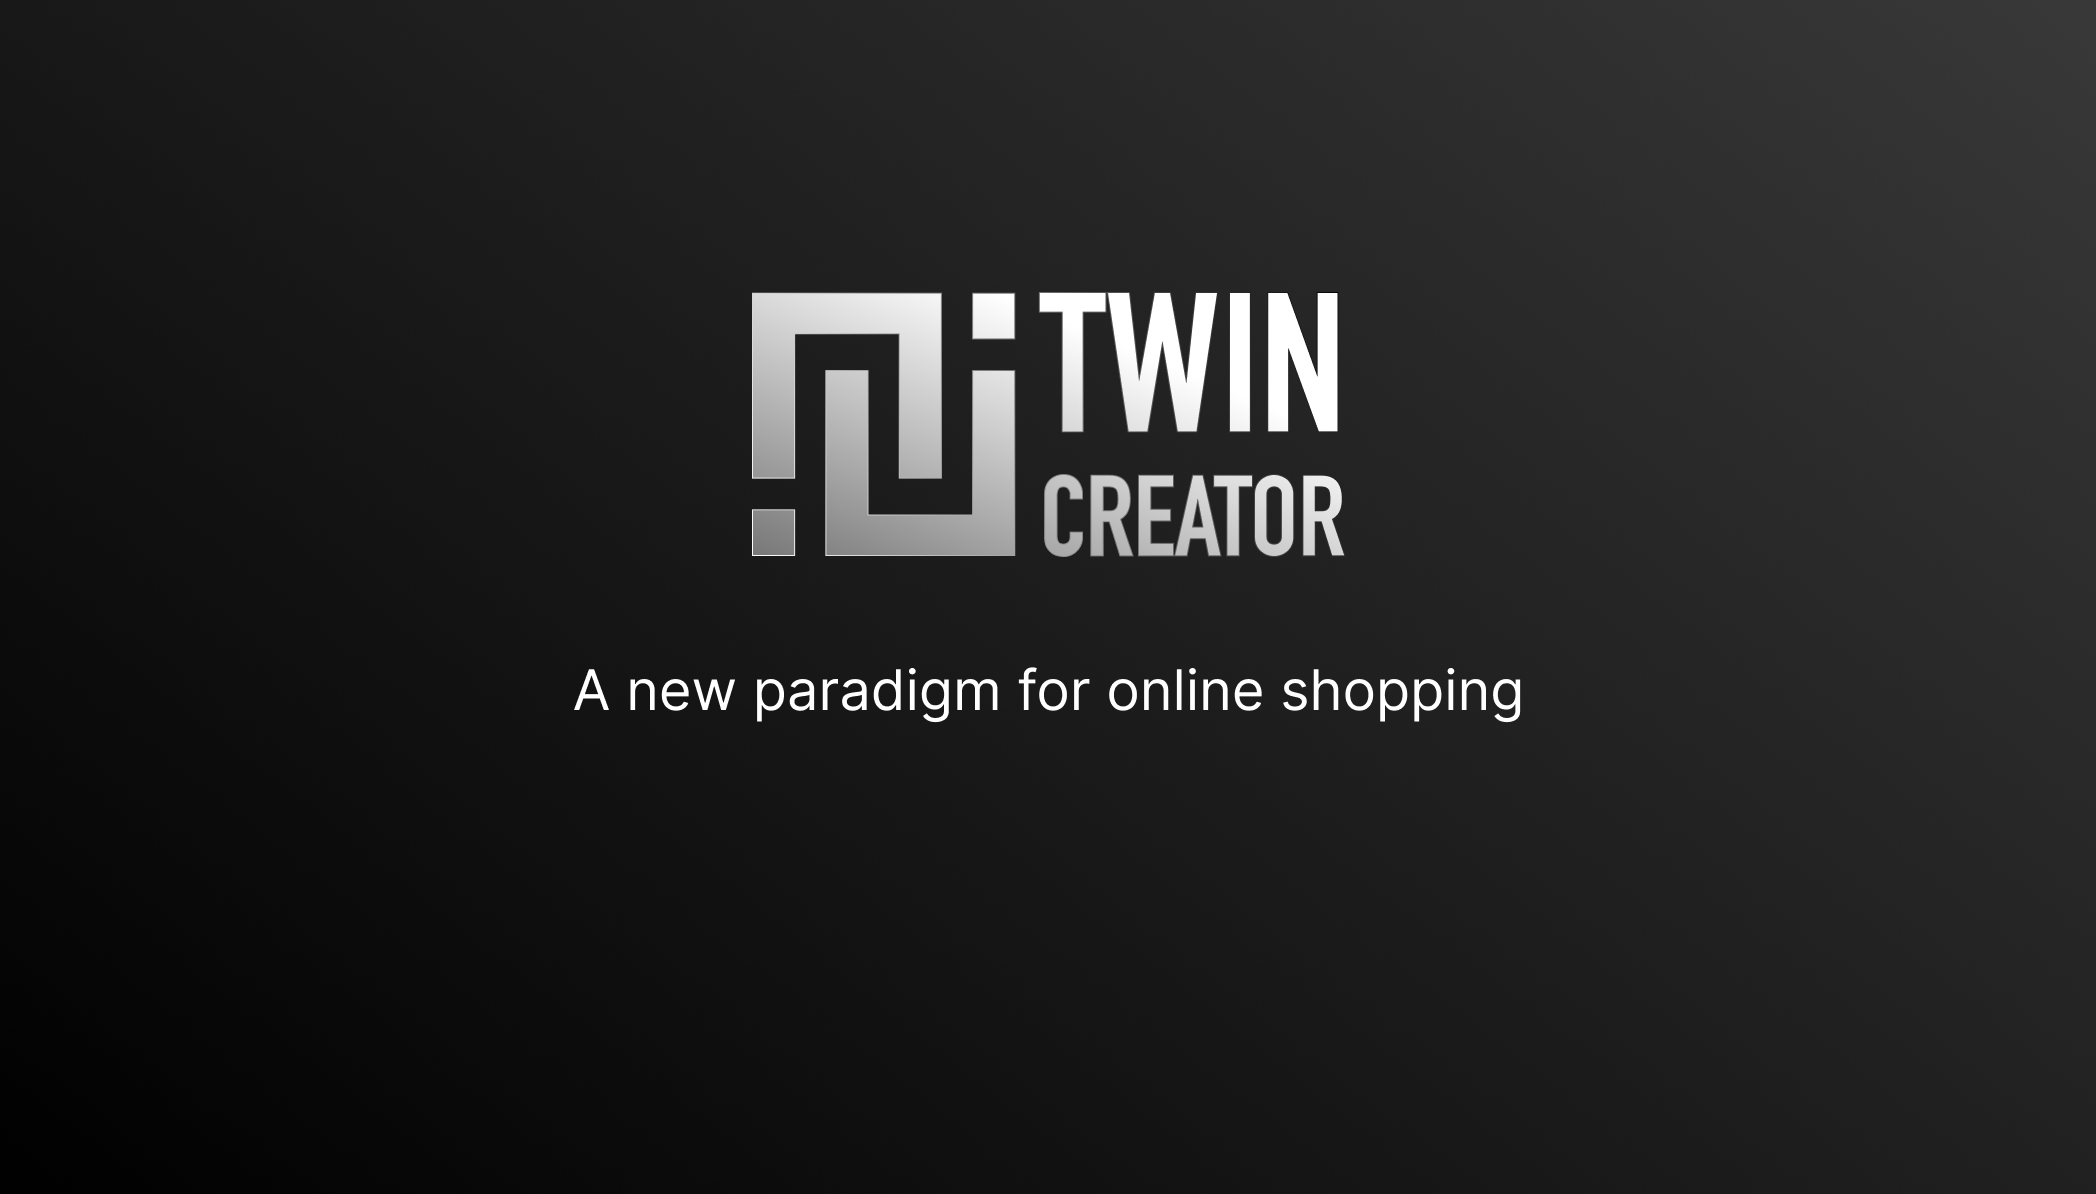 A new paradigm for online shopping